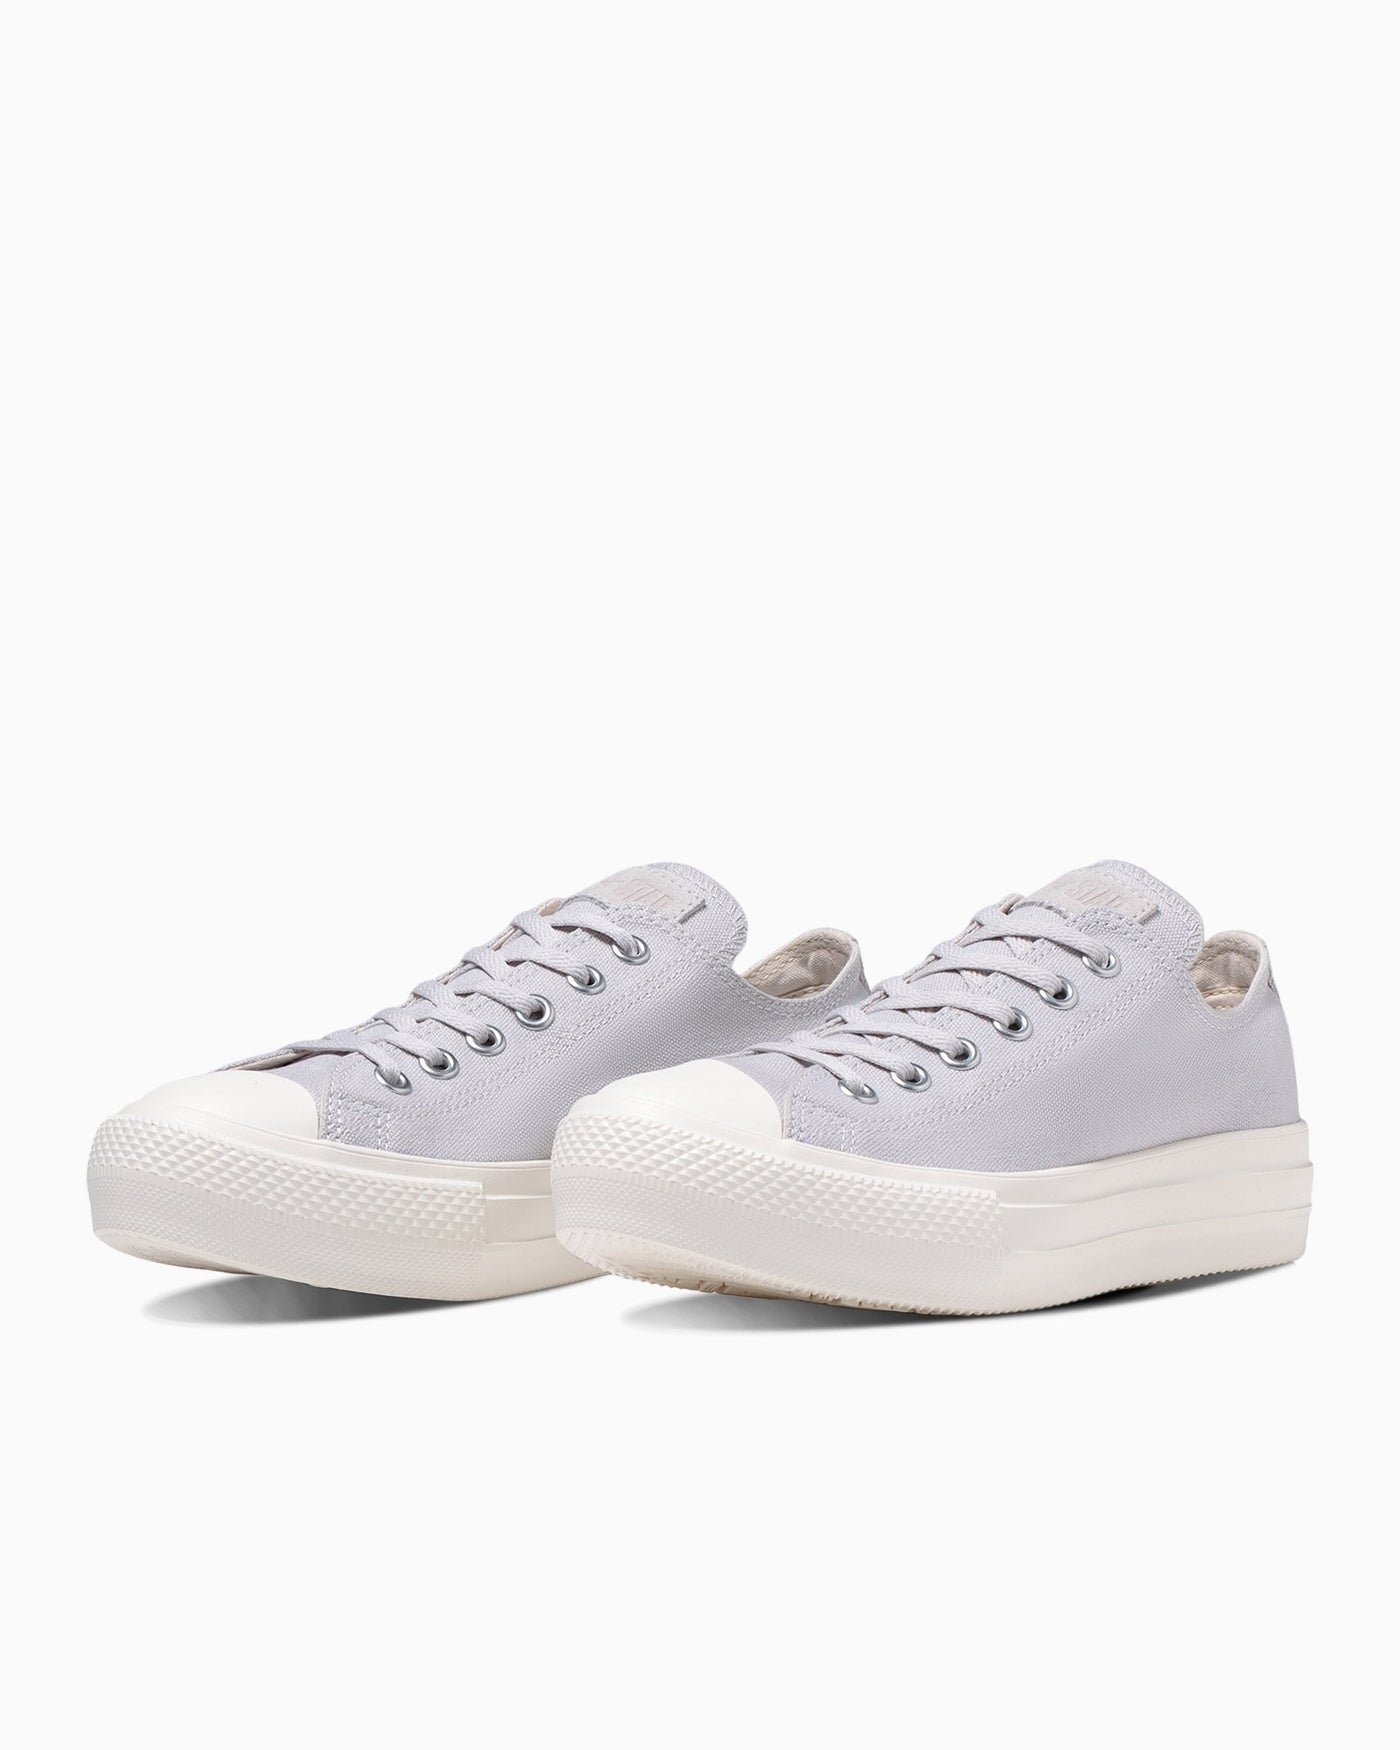 ALL STAR LIGHT PLTS POINTSUEDE OX